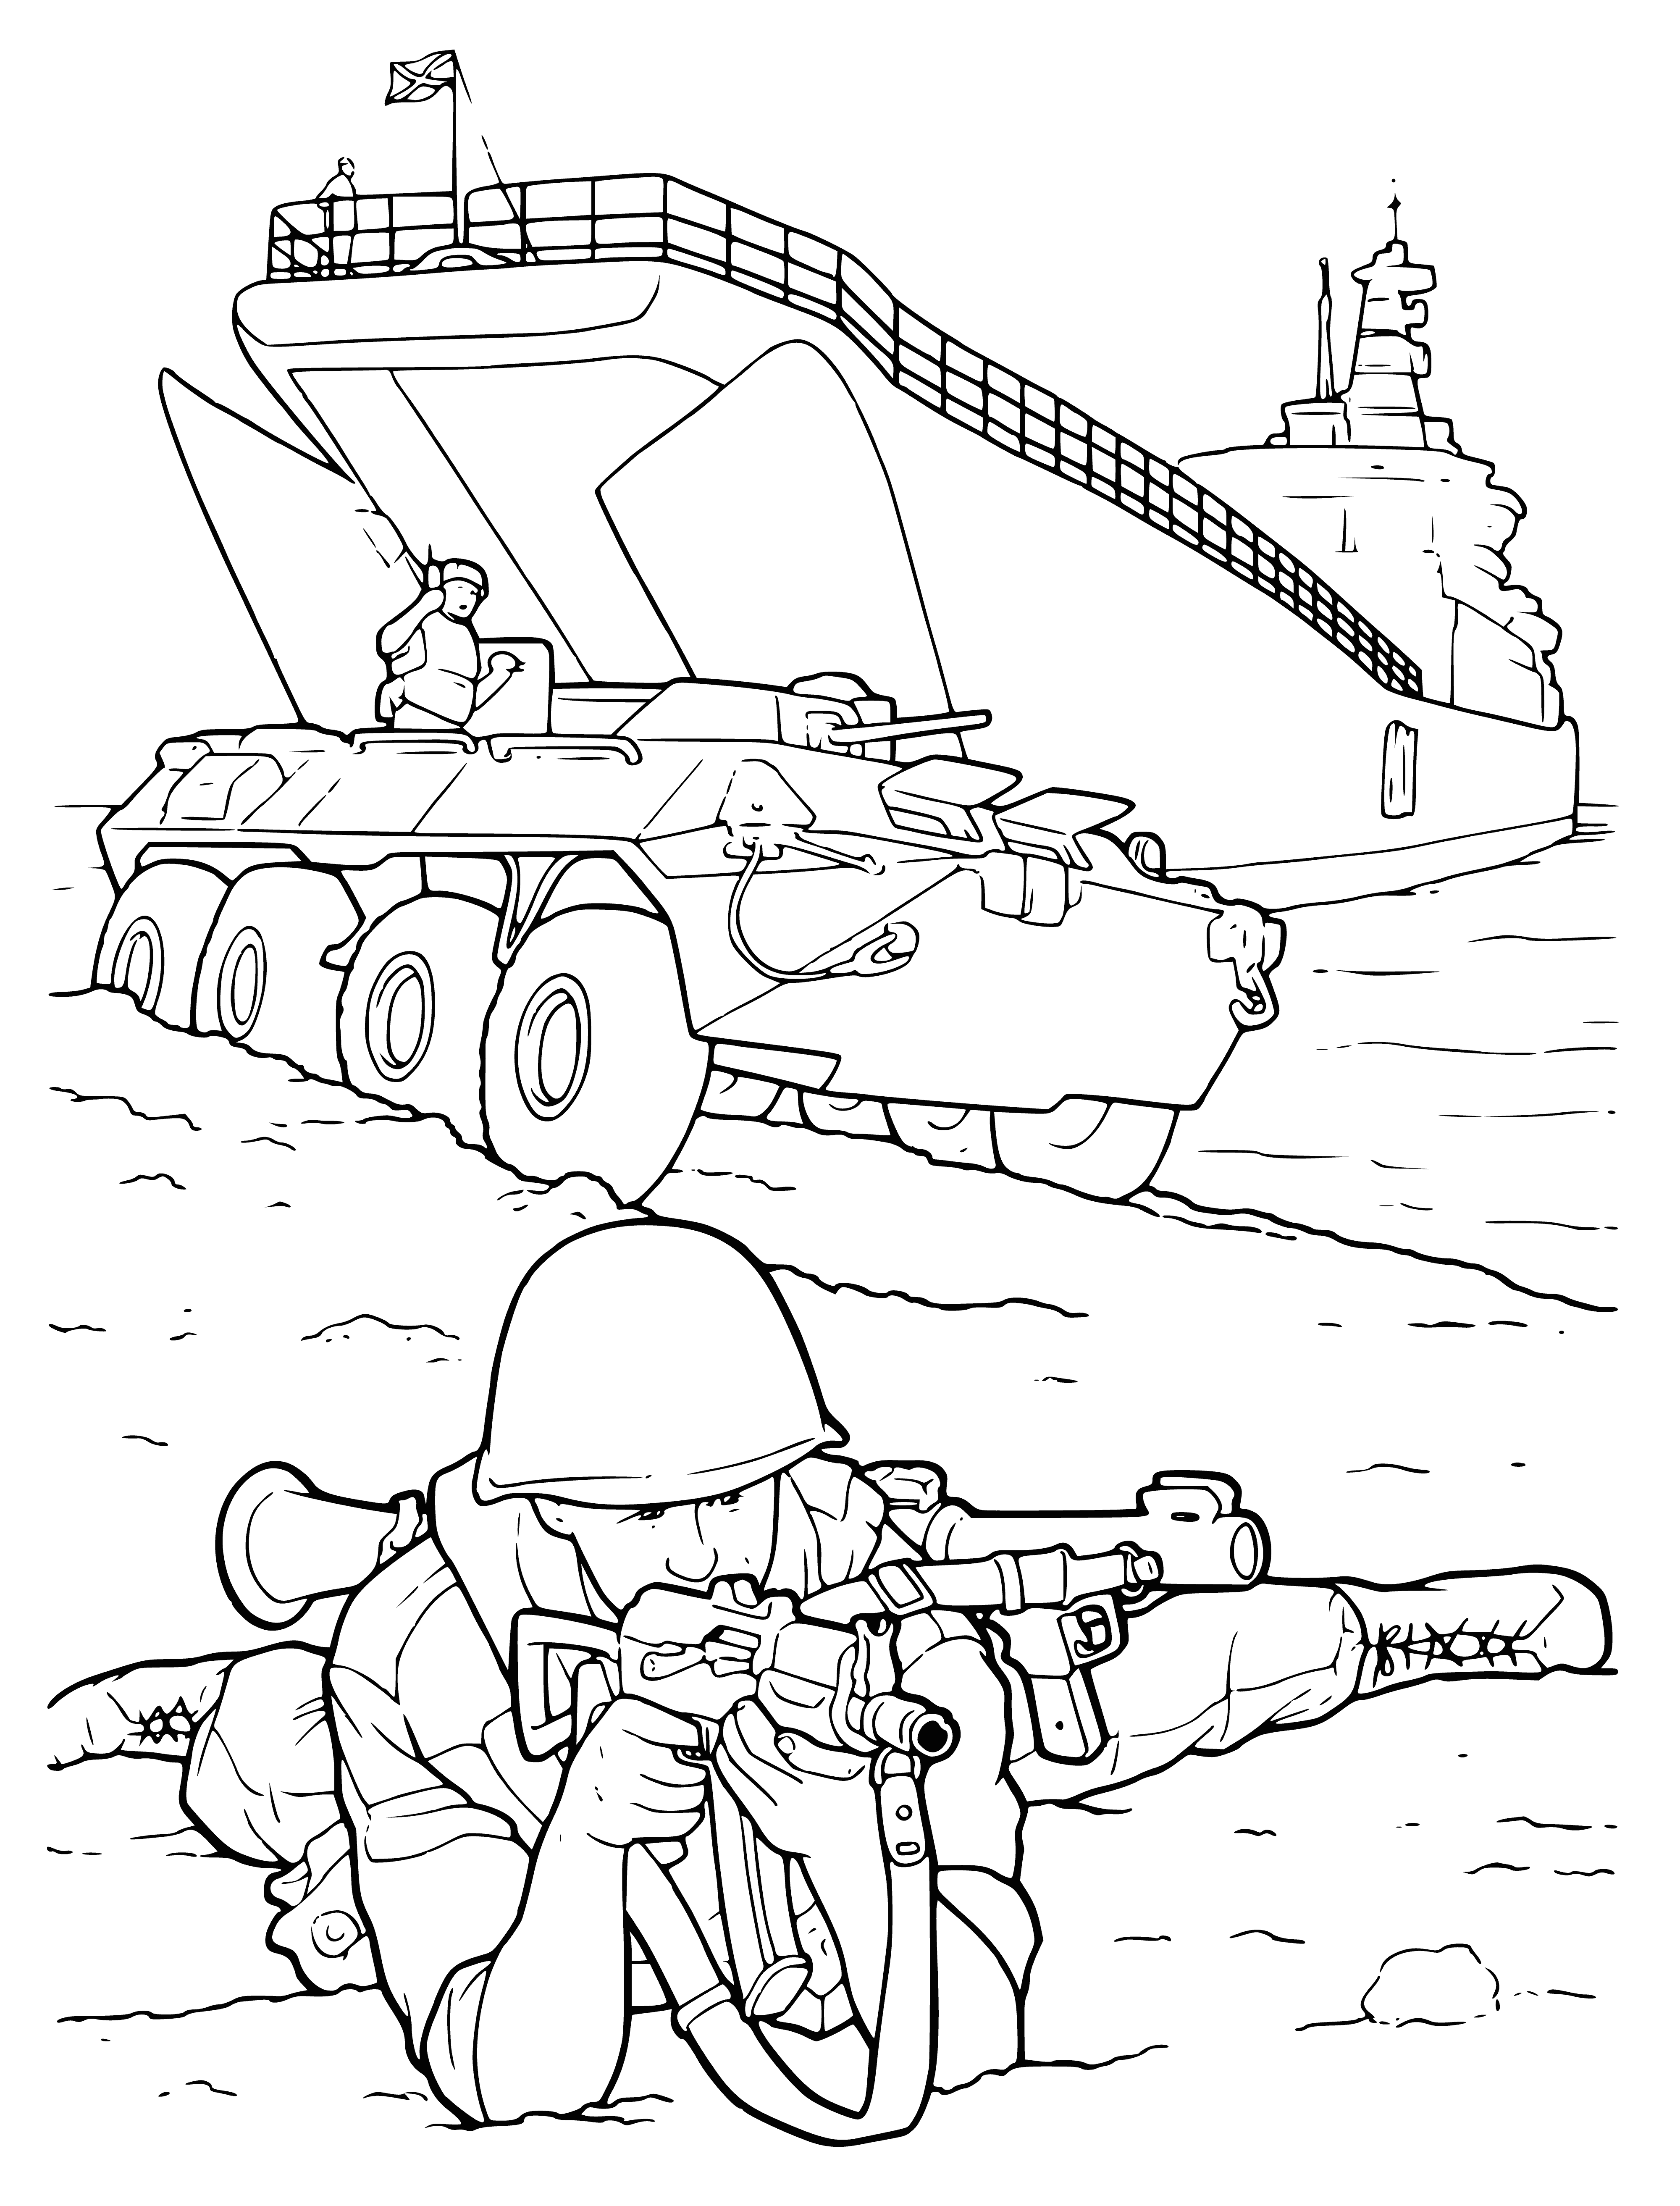 Russian army soldier coloring page